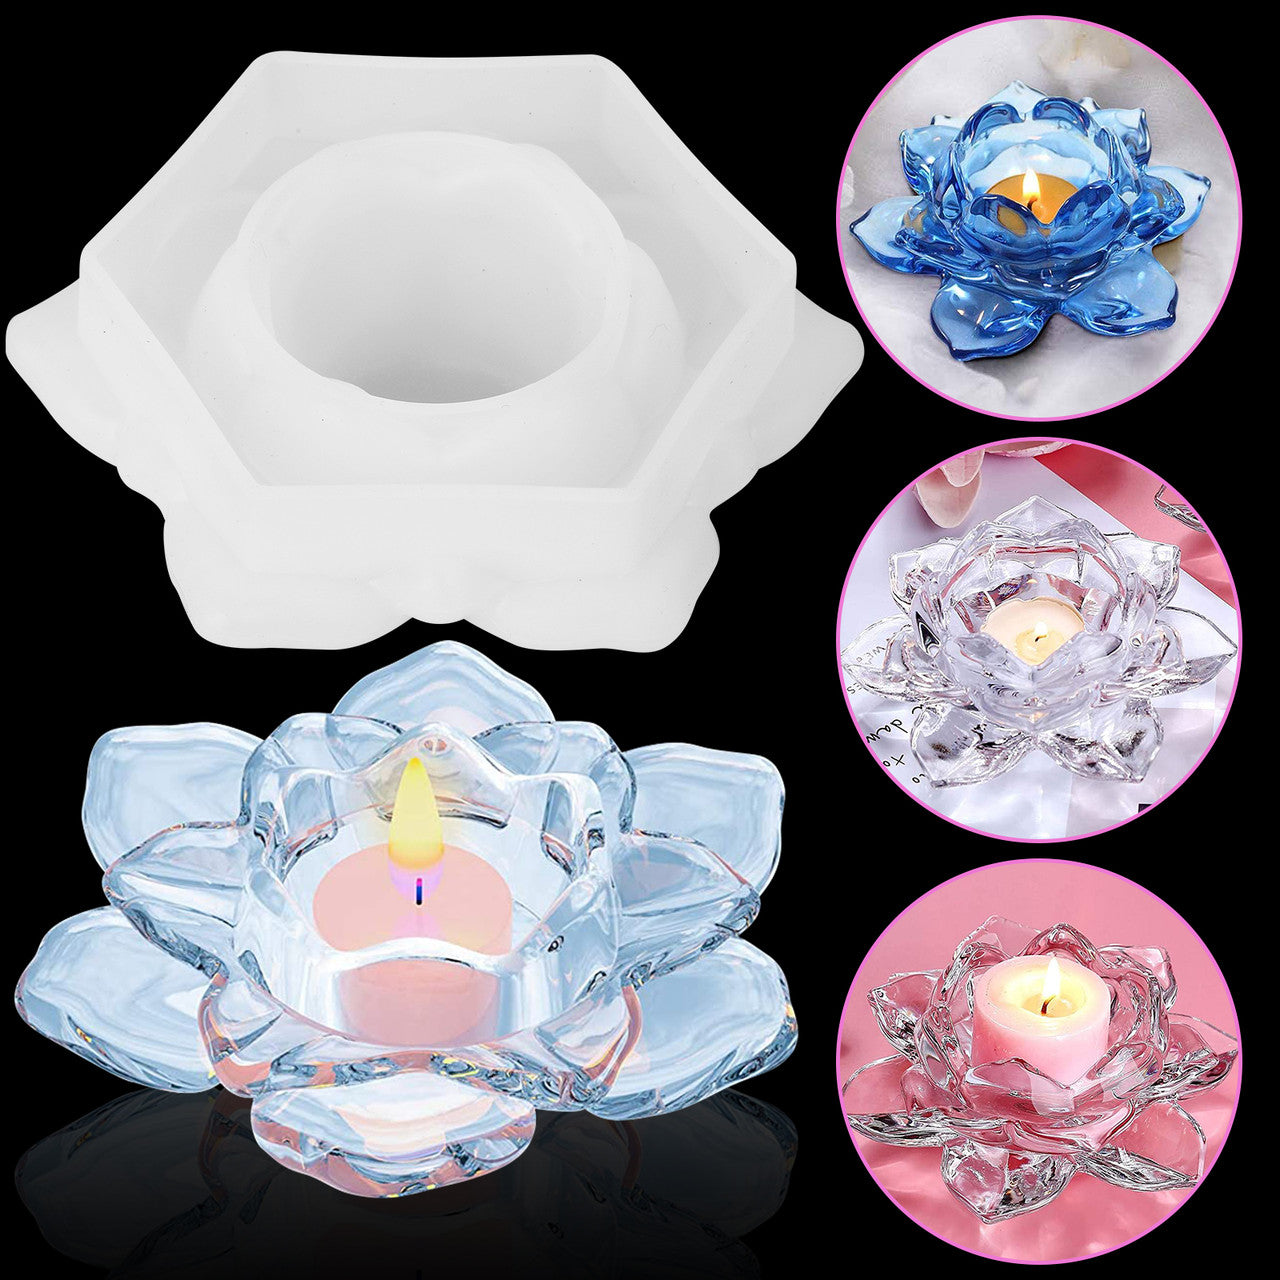 Lotus Flower Silicone Molds Candles Holders for DIY Candlestick, Jewelry Storage Box, Flower Pot, Candy Tray